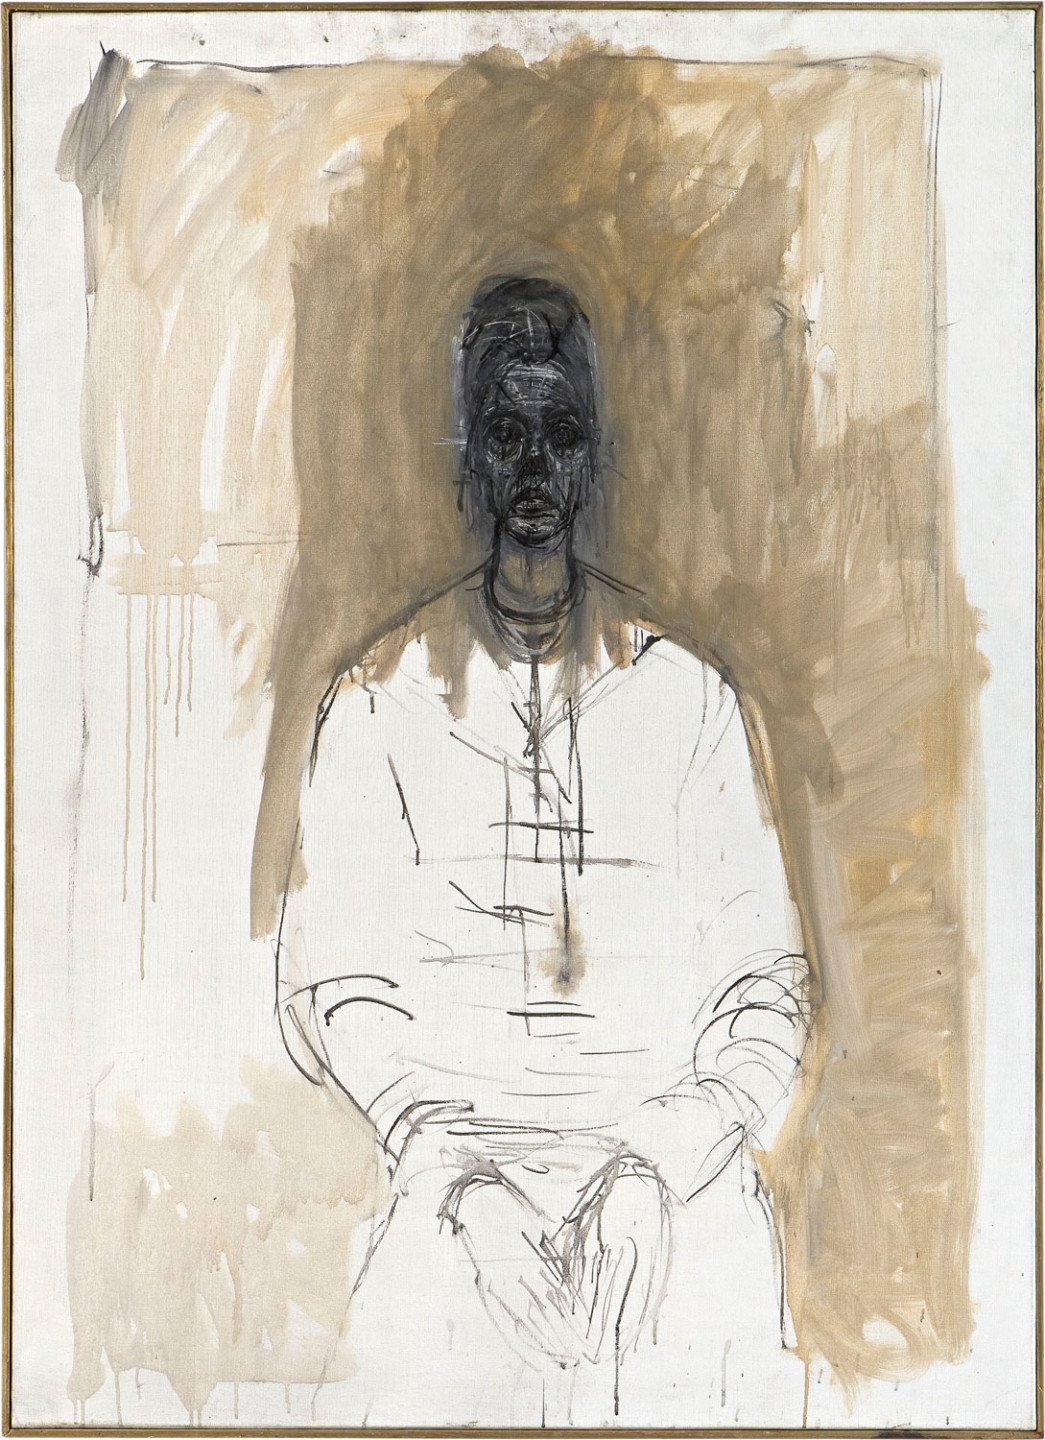 Painting by Alberto Giacometti.